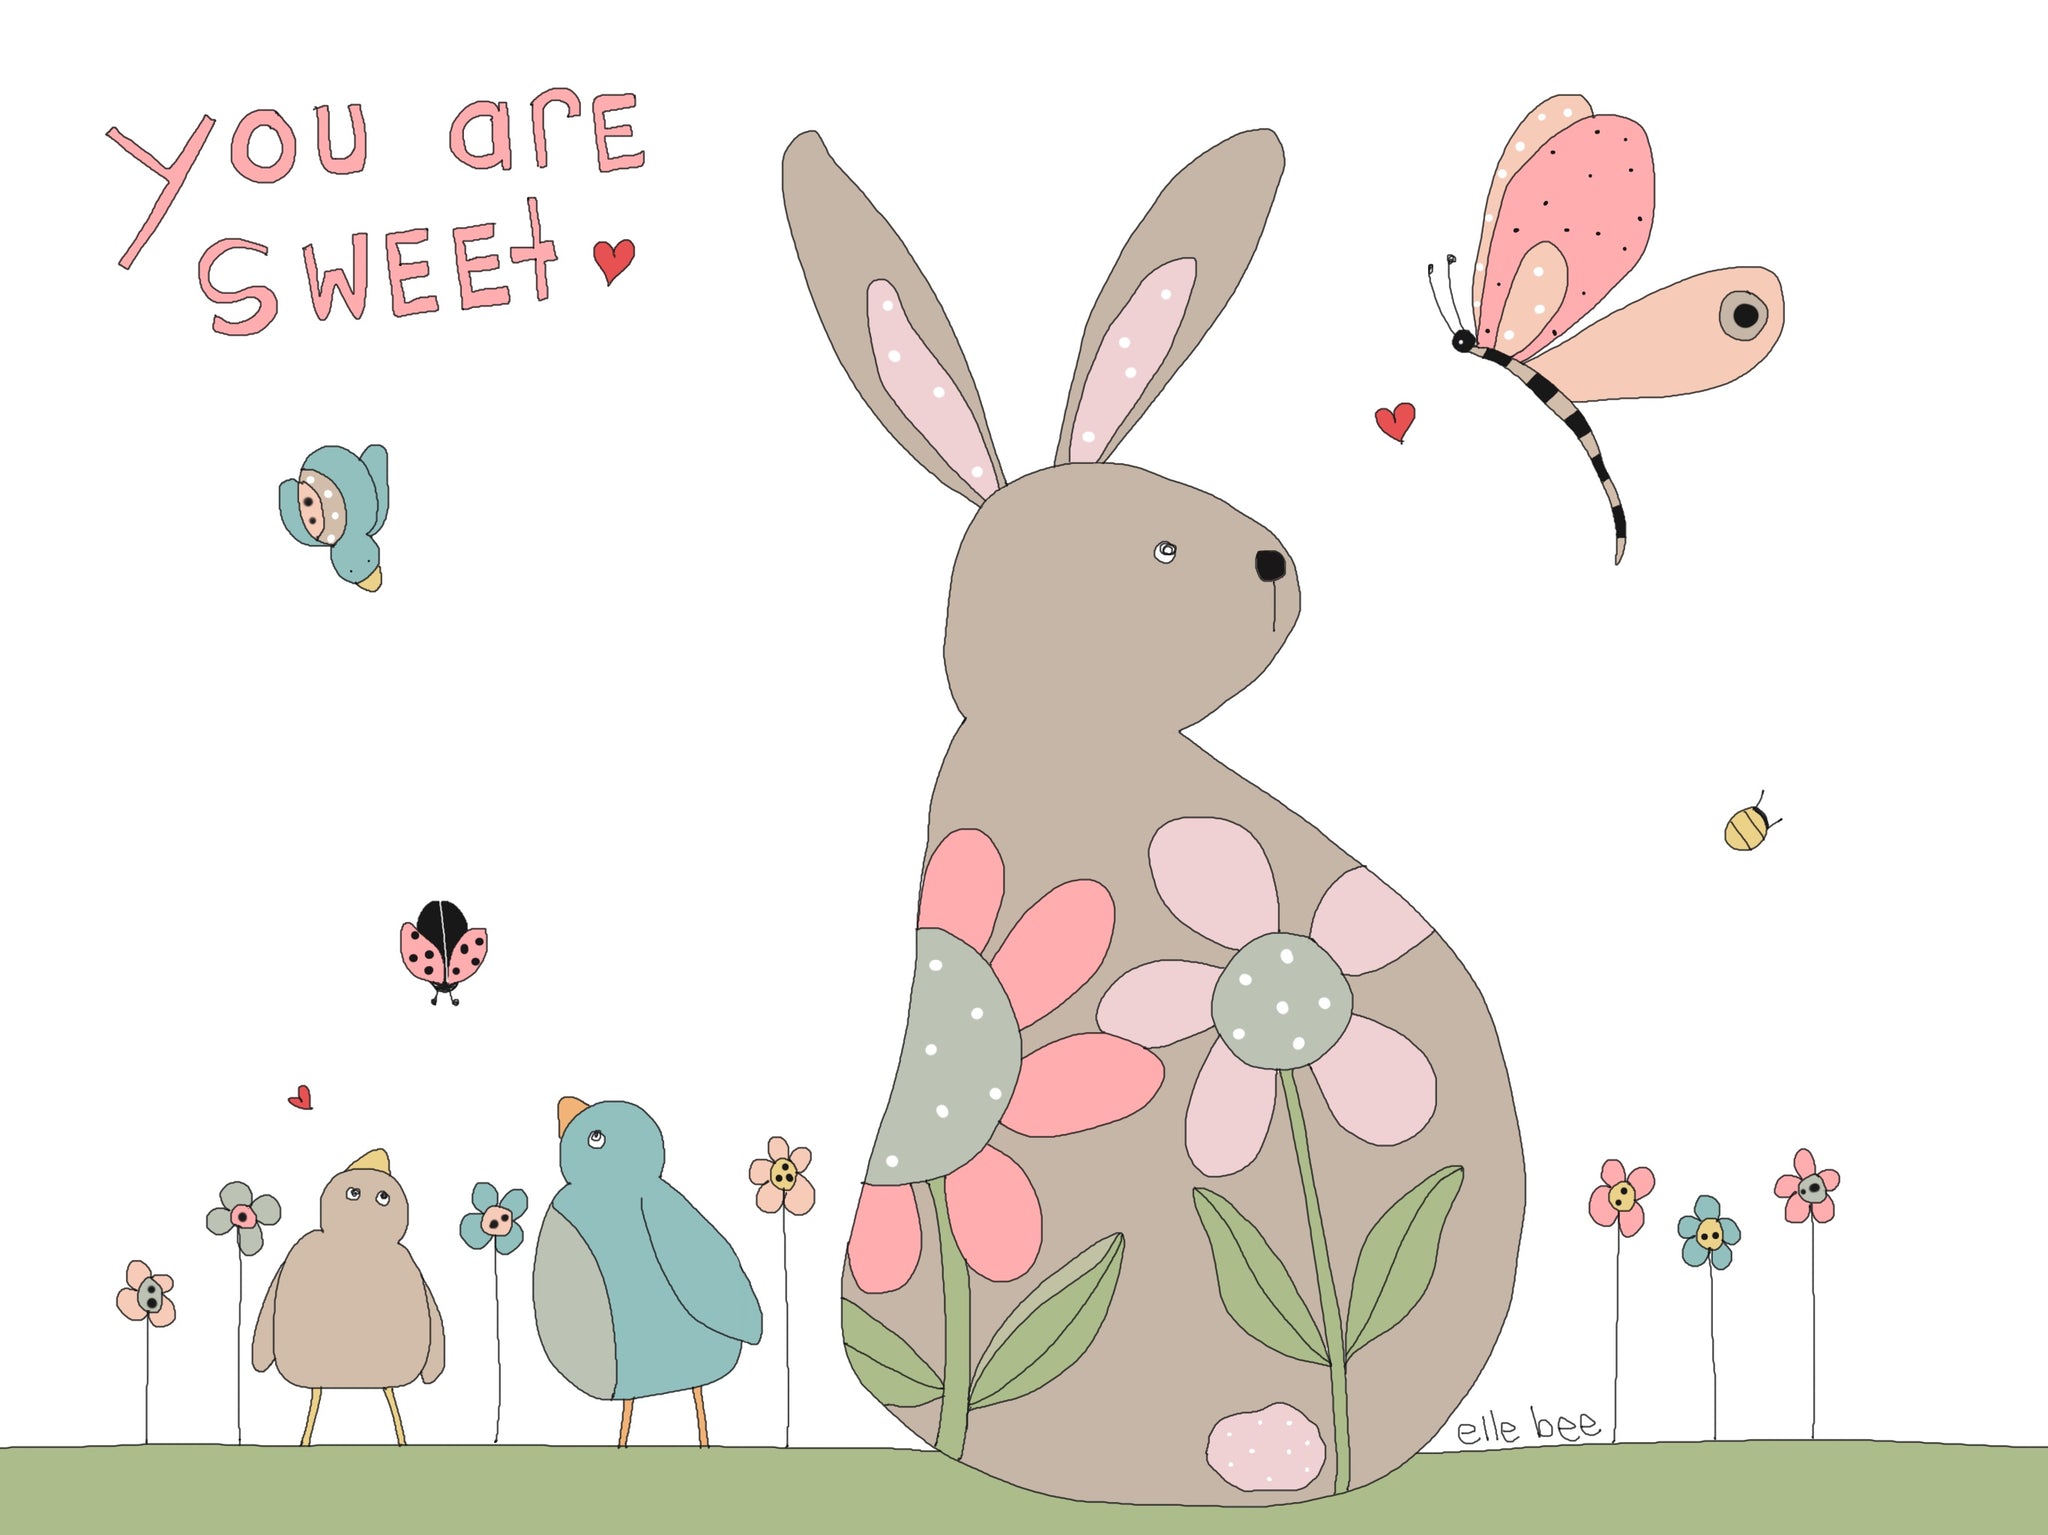 “You are sweet” greeting card